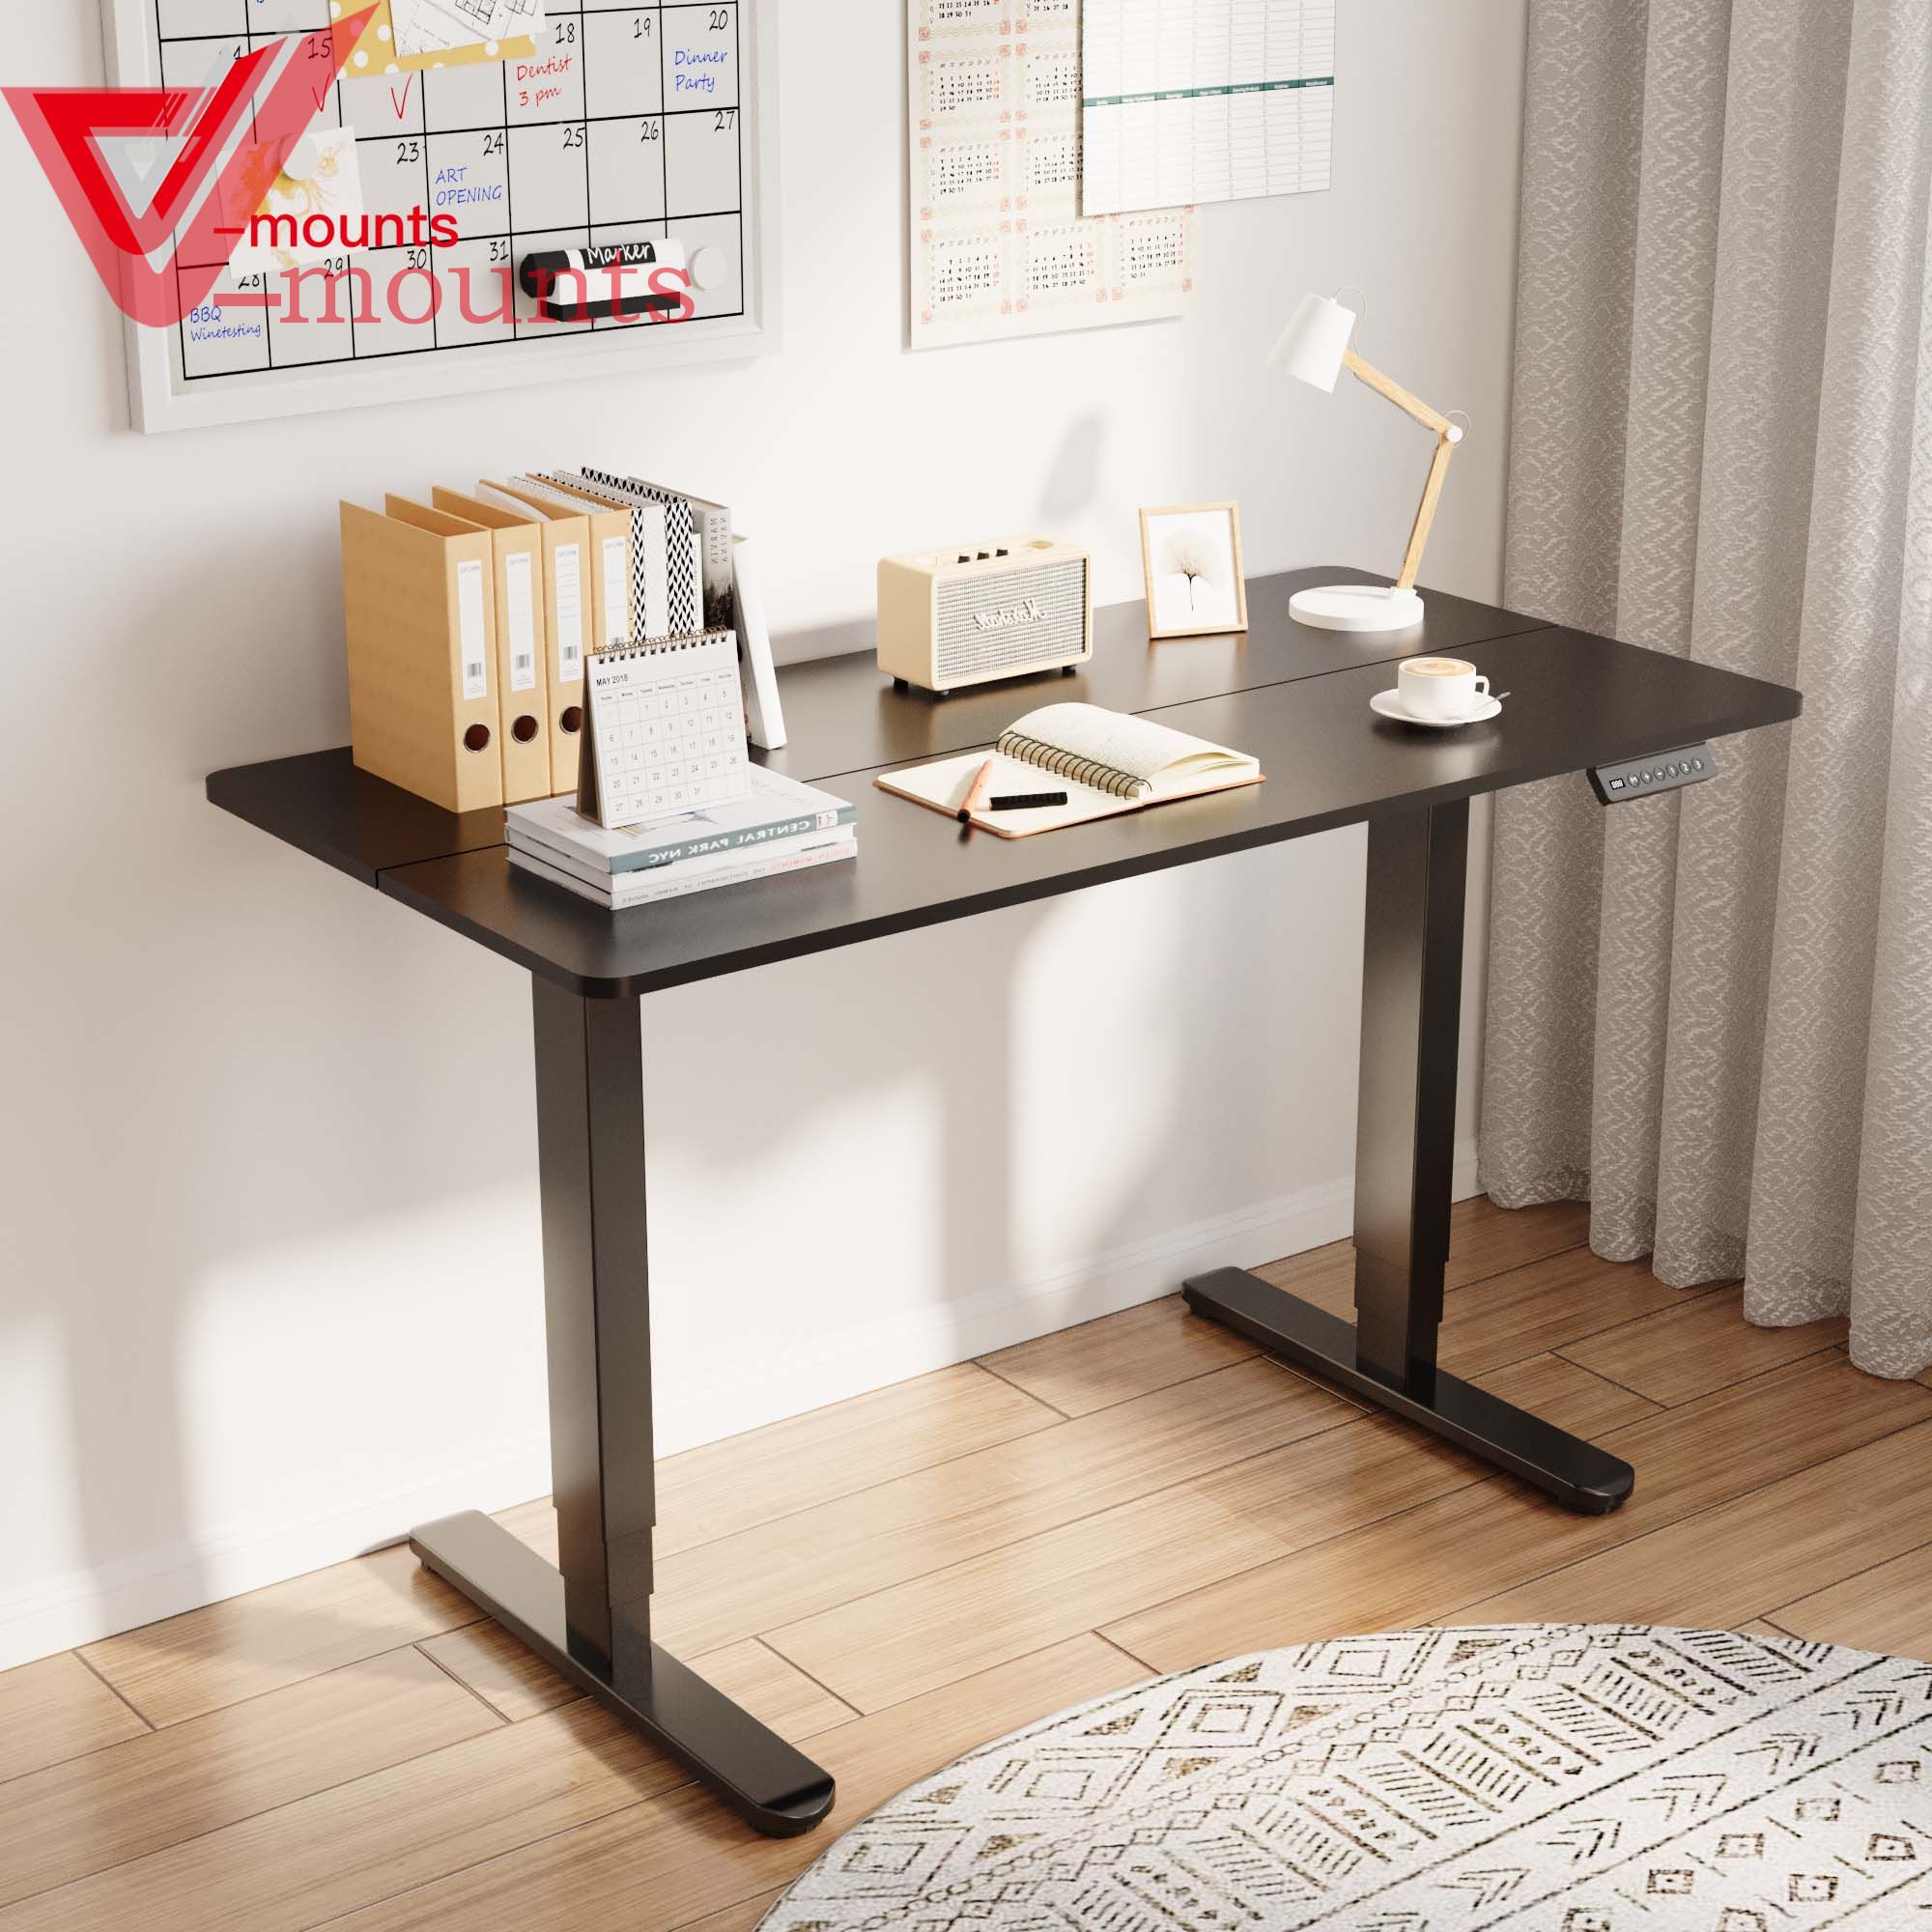 V-mounts SpaceErgo Electric Dual Motor Height Adjustable Standing Desk With 2 Spliced Board,3 Rectangular Stage Legs JSD2-02-D-2P